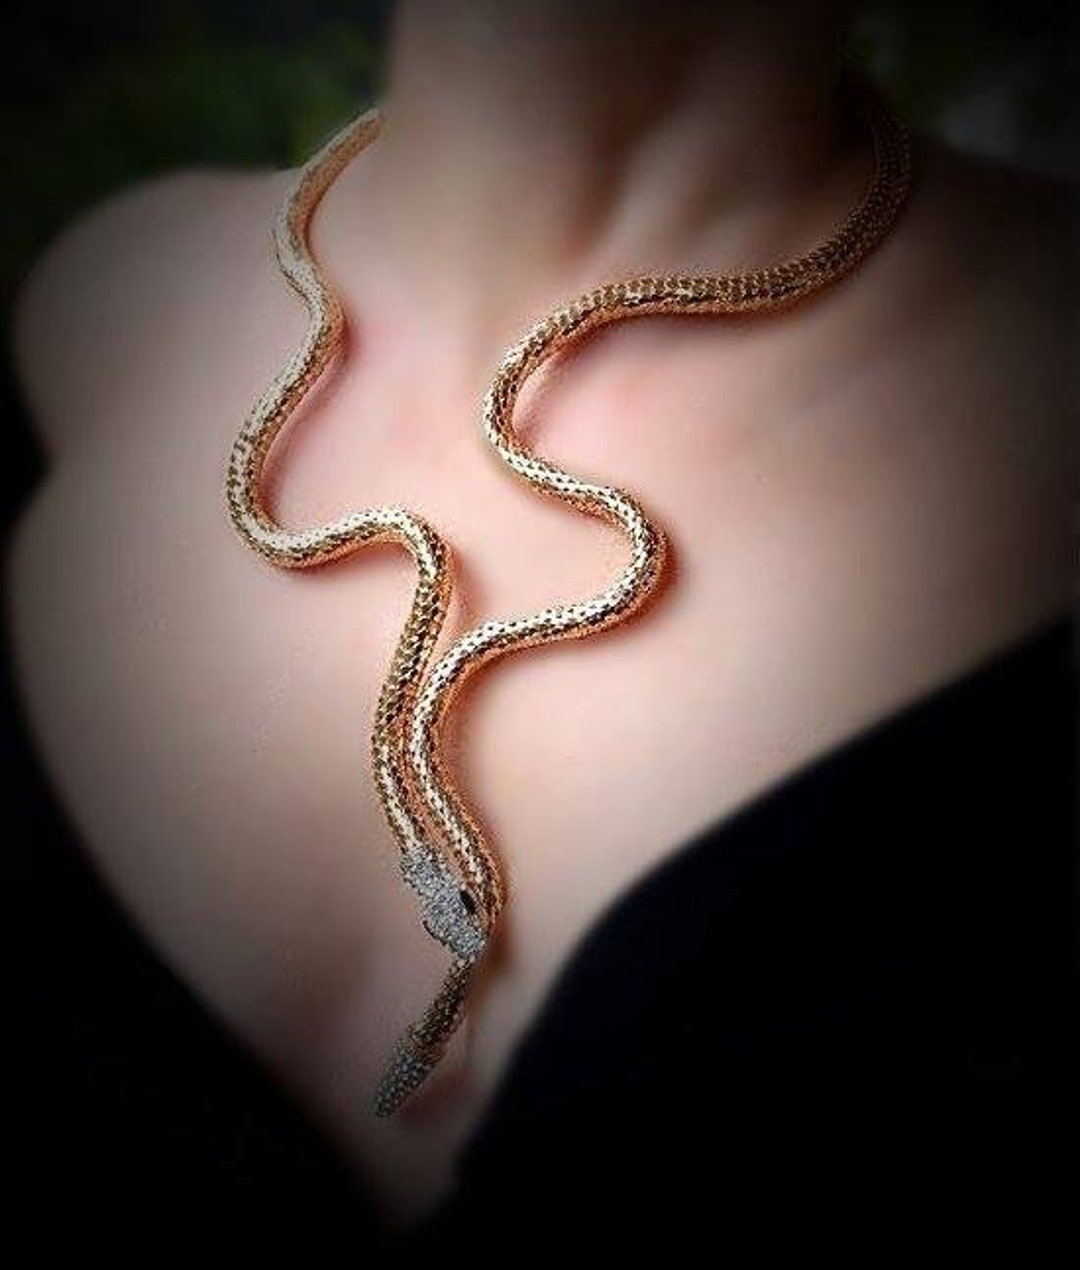 Elsa Peretti® Snake Necklace in Yellow Gold | Tiffany & Co.